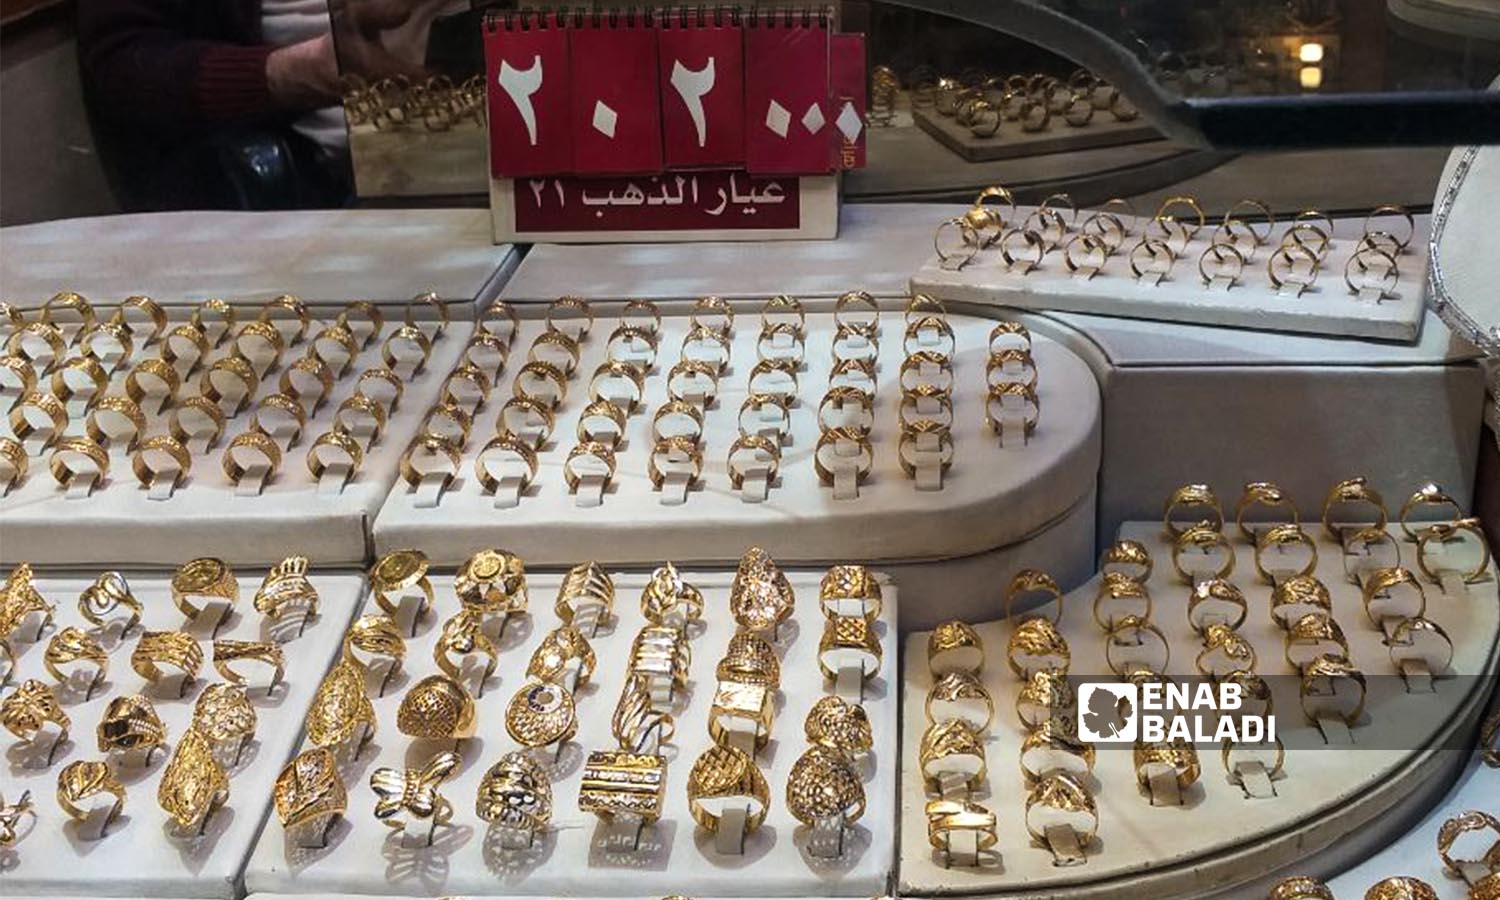 A shop selling gold in the goldsmiths market in Damascus - 10 May 2022 (Enab Baladi/Hassan Hassan)